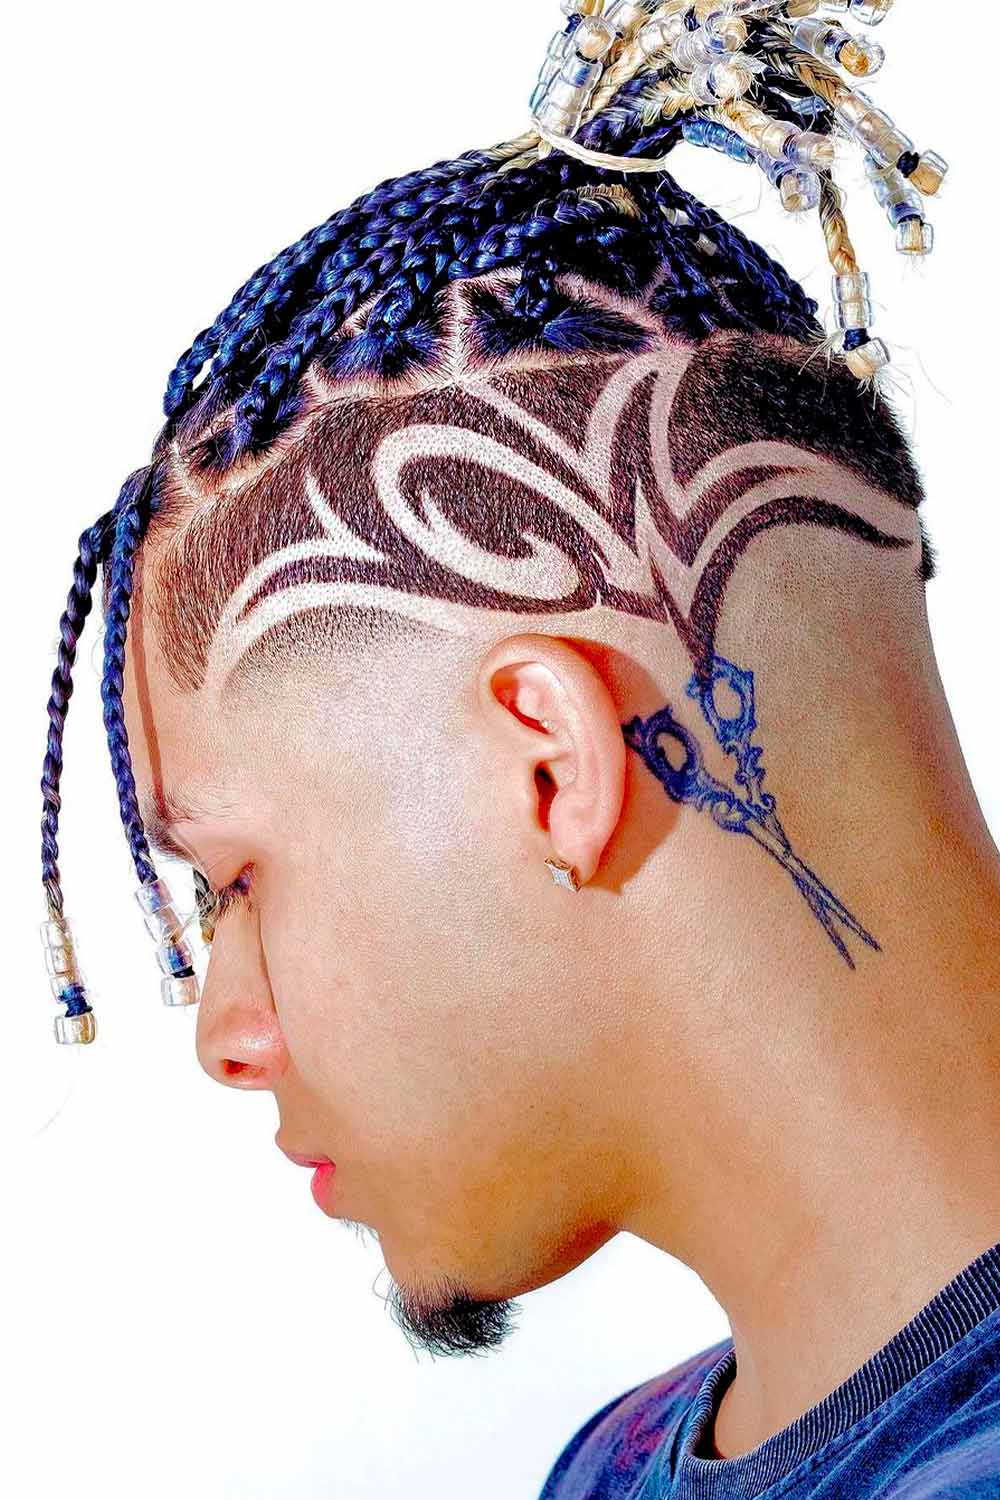 20 Superb Braids with Shaved Sides Worth Copying